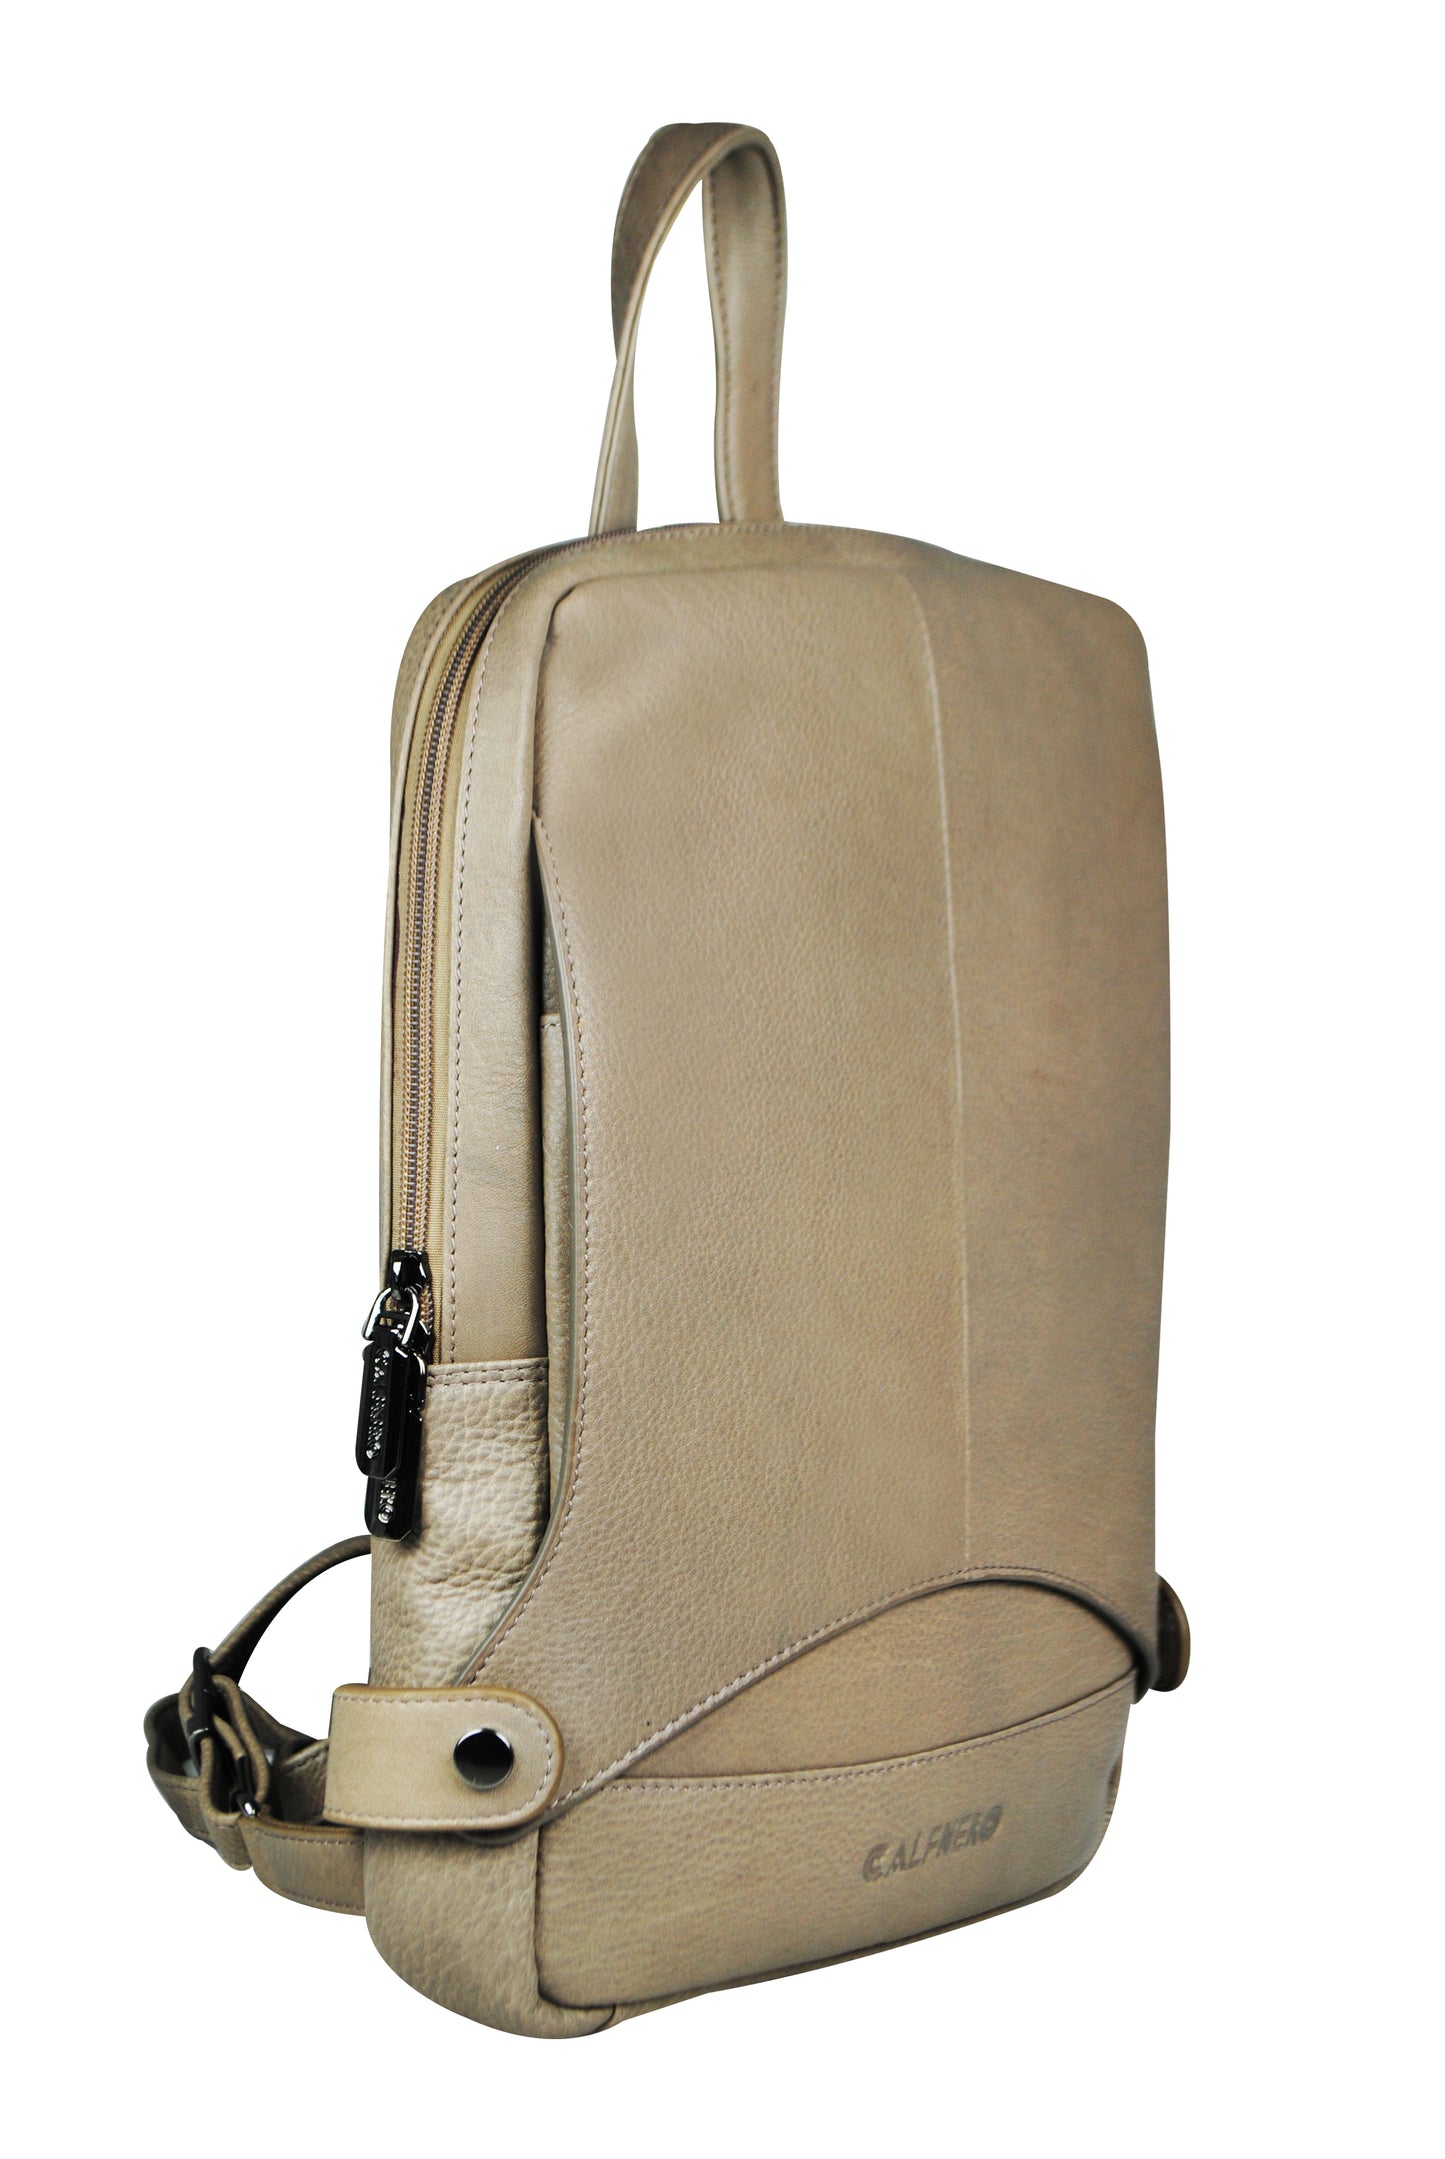 Calfnero Genuine Leather Women's Backpack (71798-Taupe)